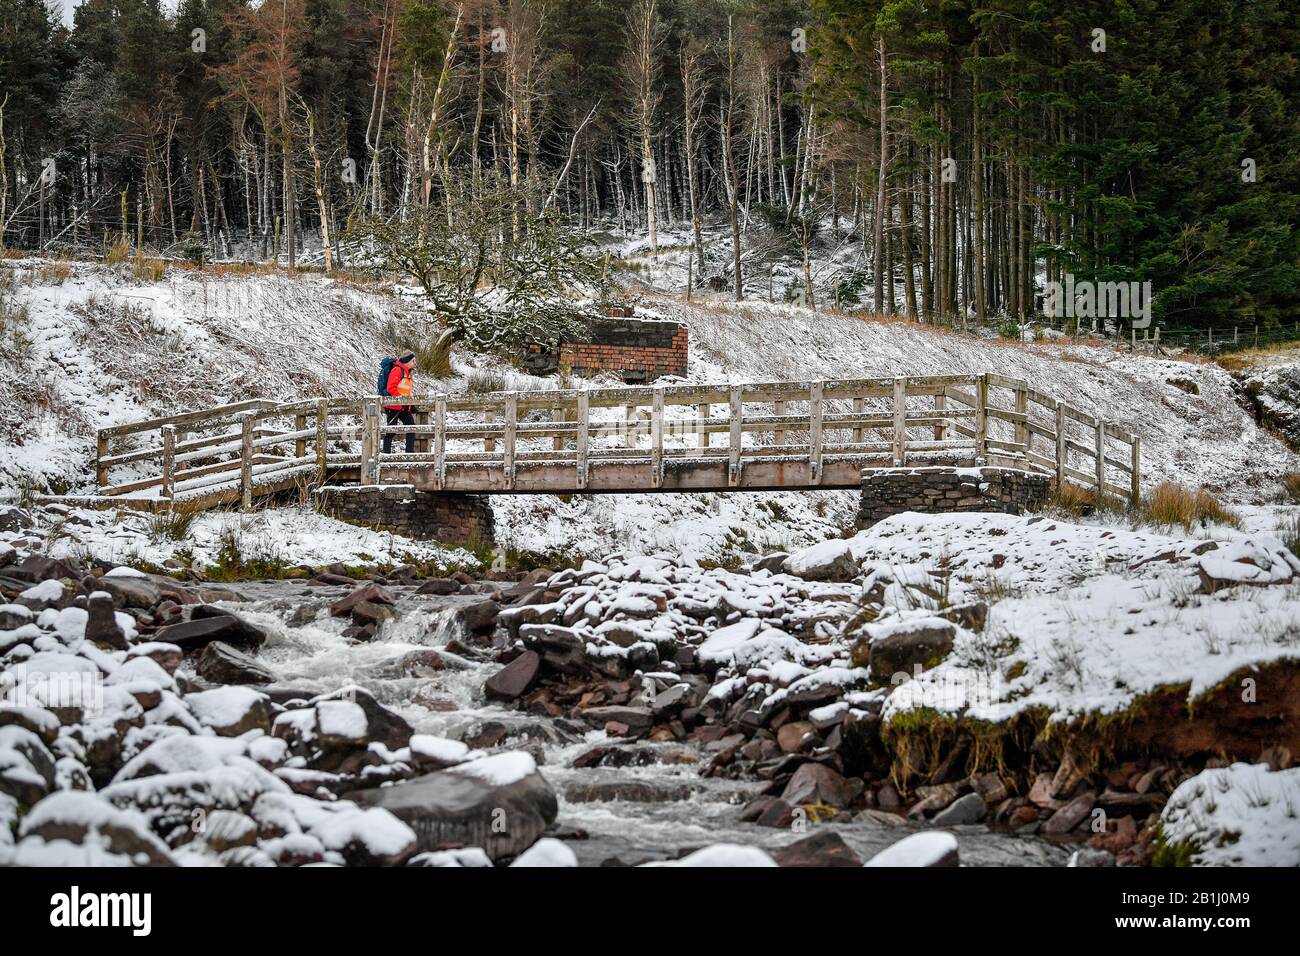 A walker crosses a bridge over a stream on the footpath towards Pen y Fan mountain on Brecon Beacons National Park, Wales, after temperatures plummeted overnight across Britain, and forecasters warned of more ice and snow over the next 24 hours. Stock Photo